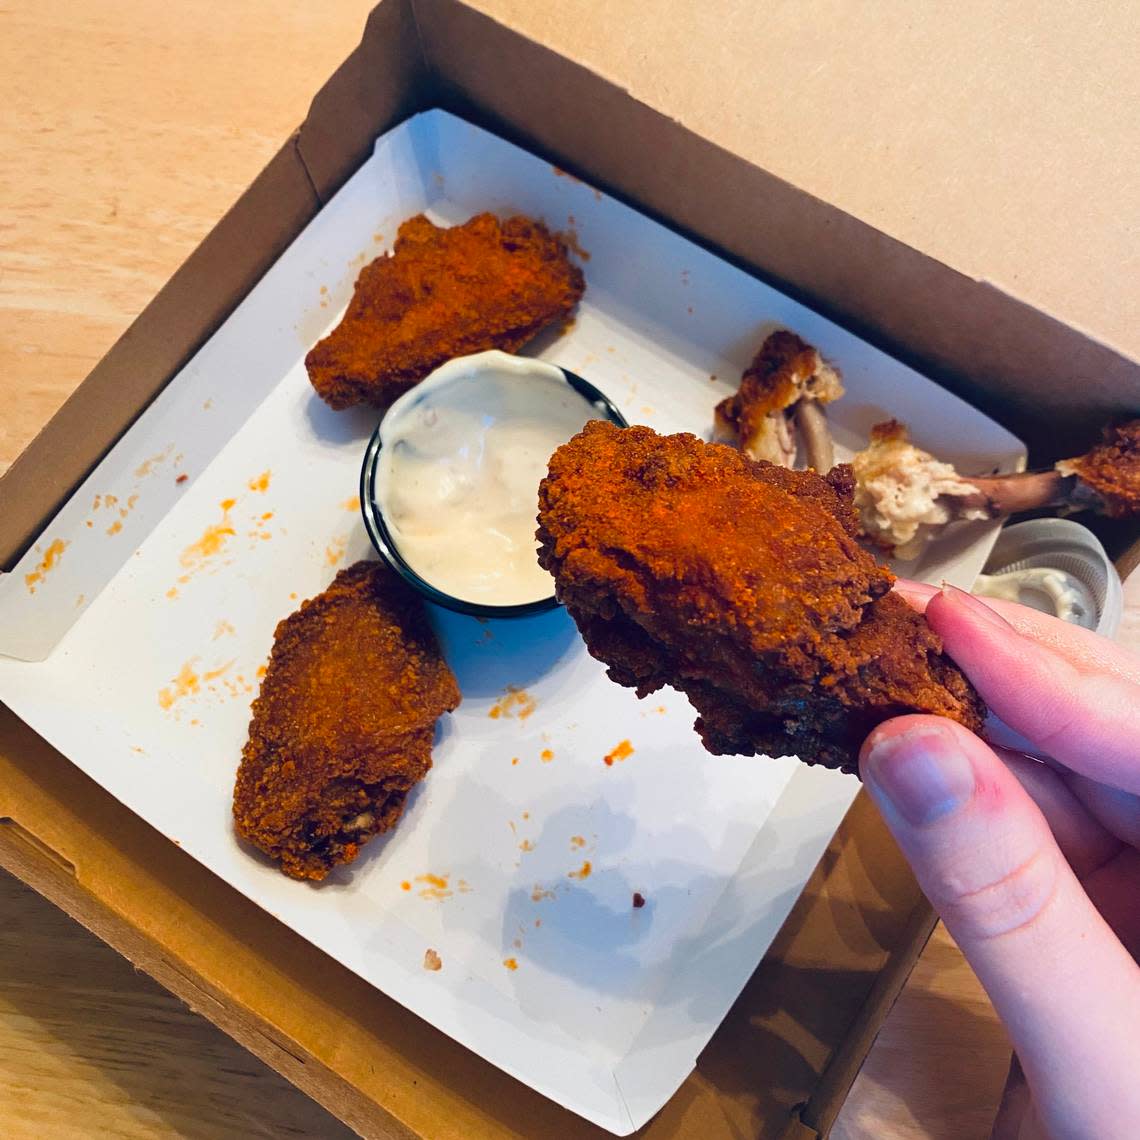 Taco Bell’s wings are crispy and deliciously seasoned. They also come with a spicy ranch dipping sauce.